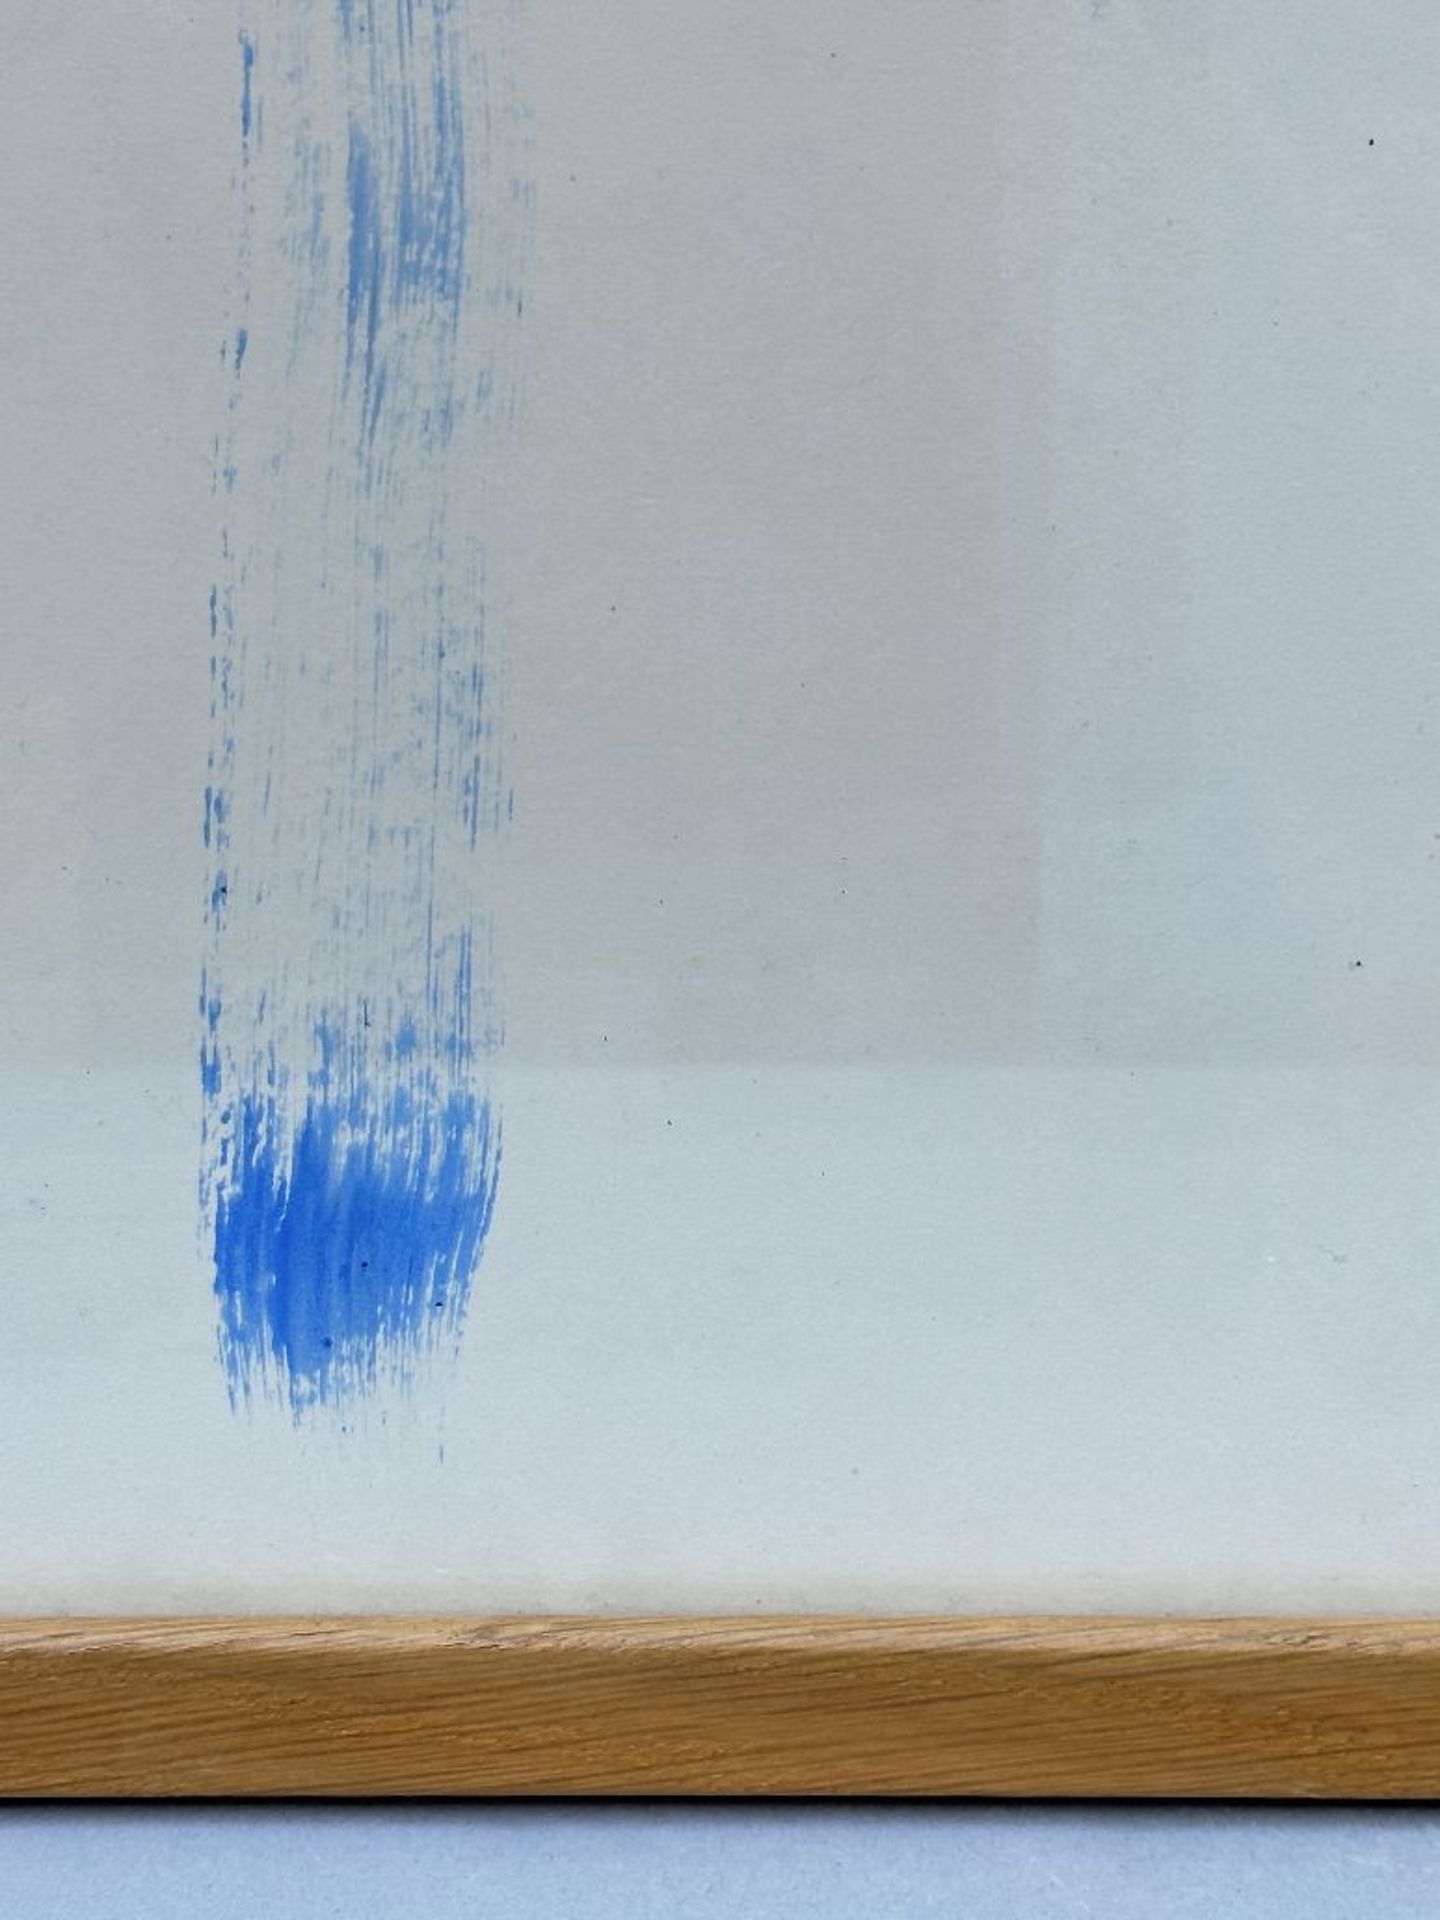 Lee Ufan (possibly by his hand): work on paper 'blue brush stroke' - Image 5 of 5